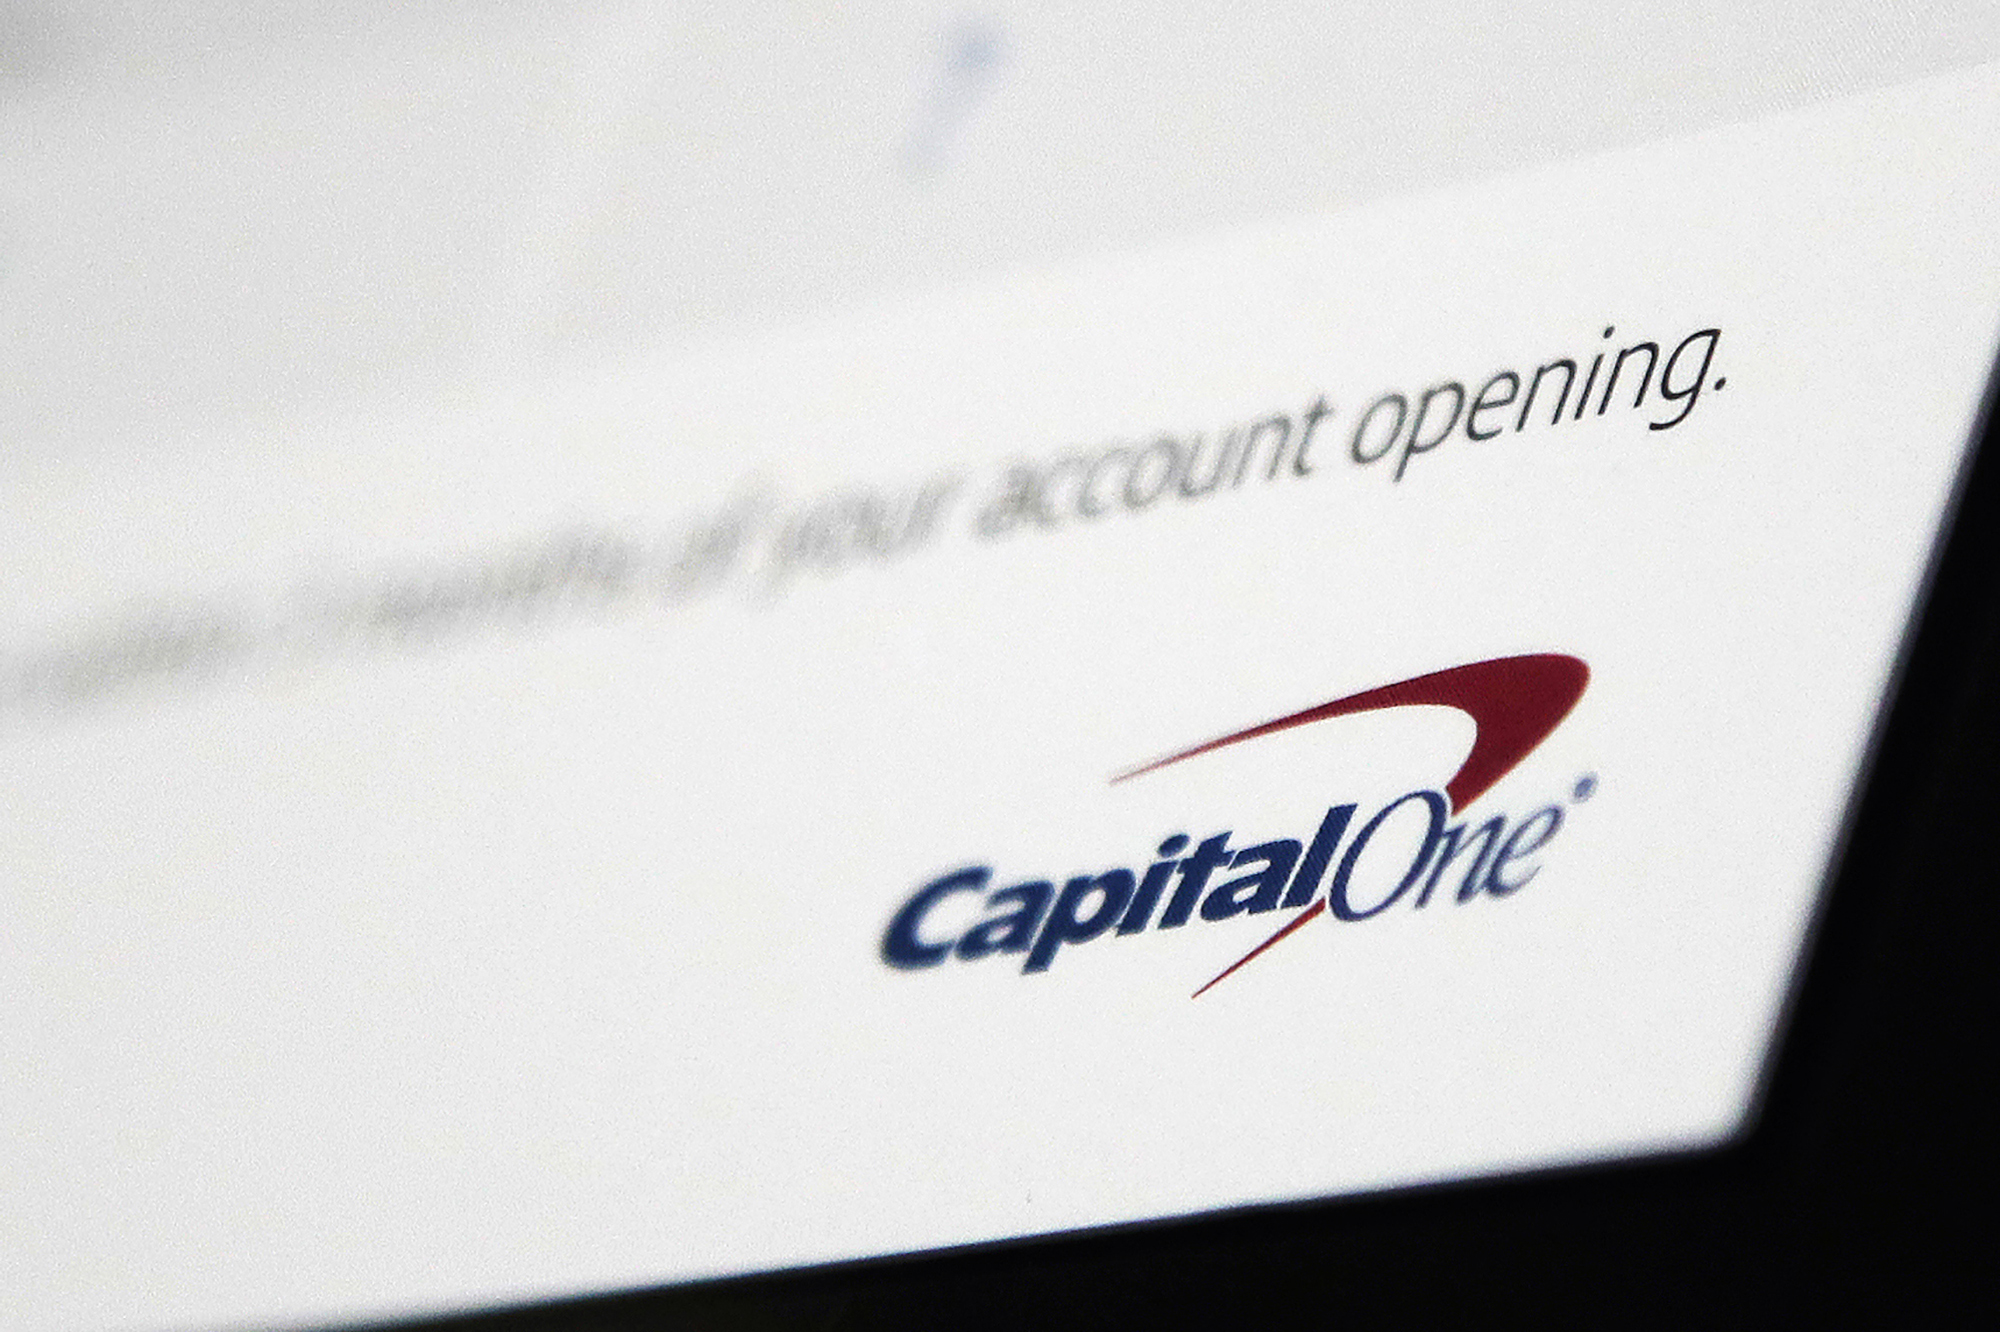 FILE - This July 22, 2019, file photo, shows a Capital One mailing in North Andover, Mass. After decades of raking in billions of dollars from mostly poor Americans short of cash in their accounts, the biggest banks, under pressure from lawmakers and regulators, are slowly decreasing their reliance on the widely unpopular practice. Capital One, the nation's sixth-largest bank, has announced that it will end all overdraft fees in 2022. Other banks have made it harder for customers to trigger an overdraft fee. (AP Photo/Elise Amendola, File)